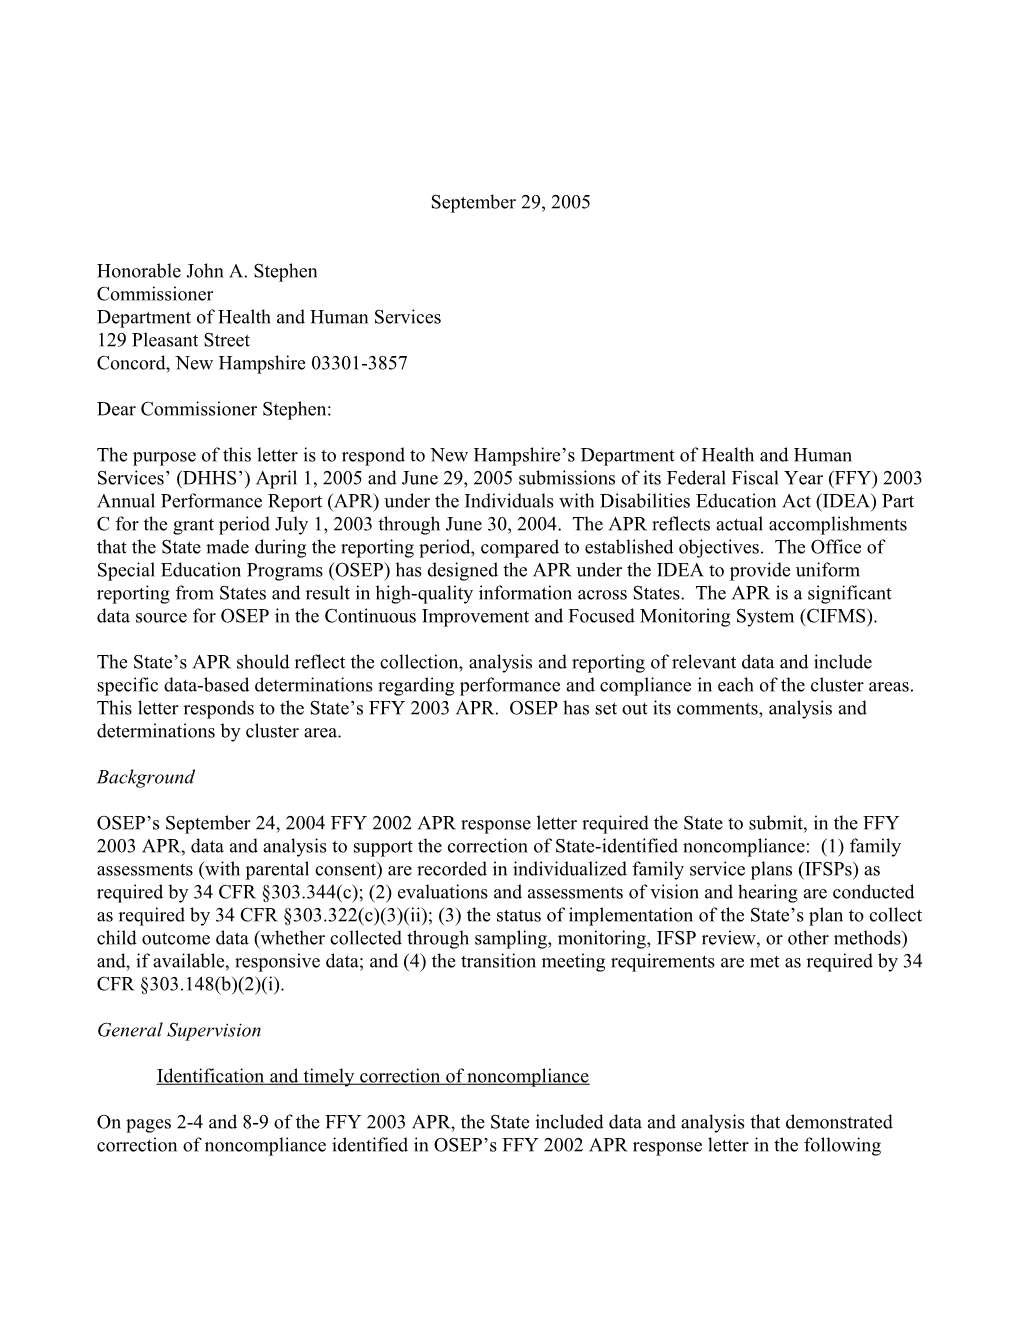 New Hampshire Part C APR Letter for Grant Year 2003-2004 (Msword)